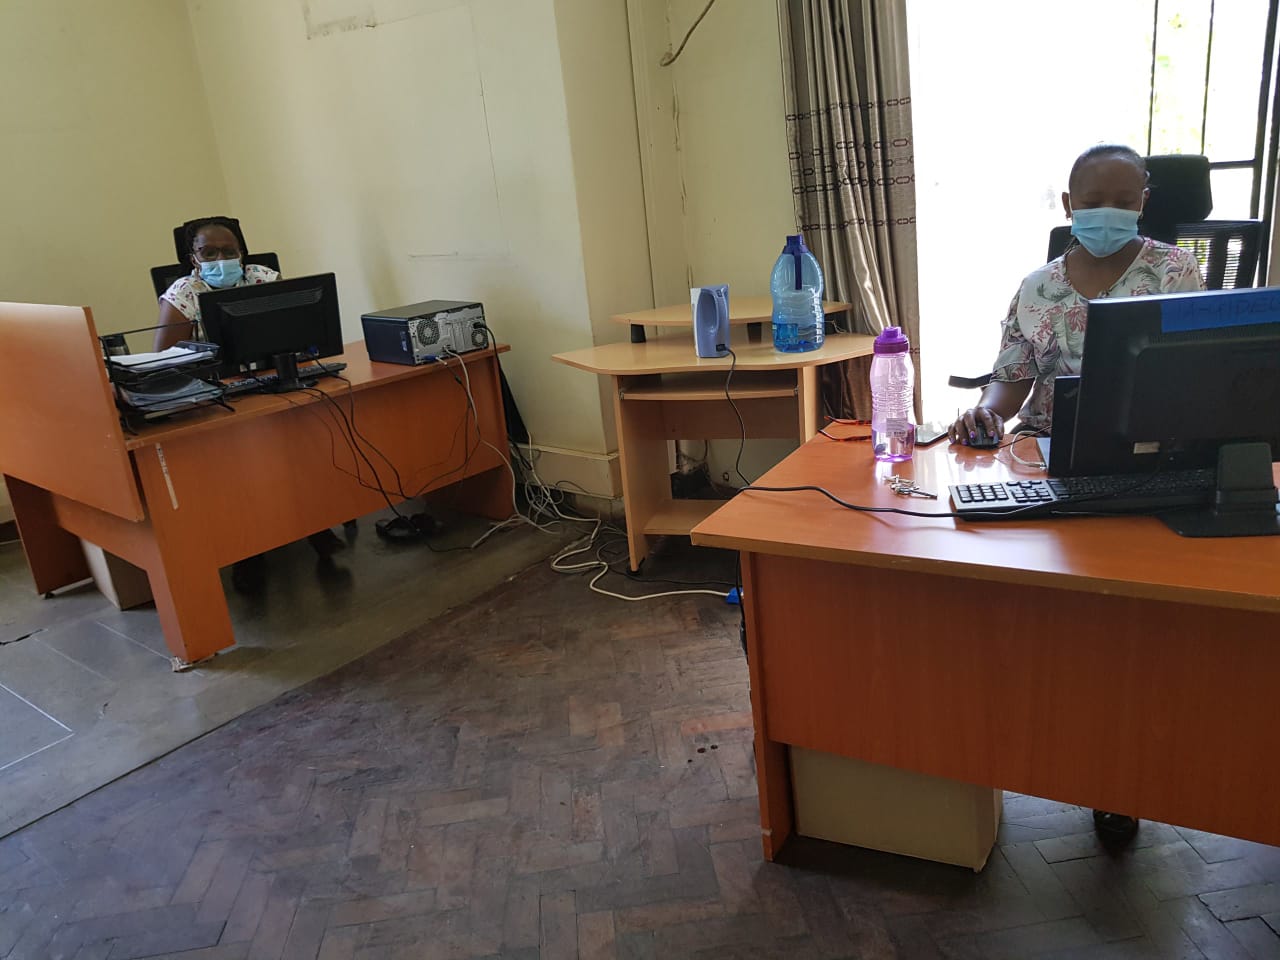 Mary Mukuha and Esther Wambua from Internal Audit office in Gandhi Wing observing social distance of 1.5 metres to prevent any risk of transmitting Corona virus 